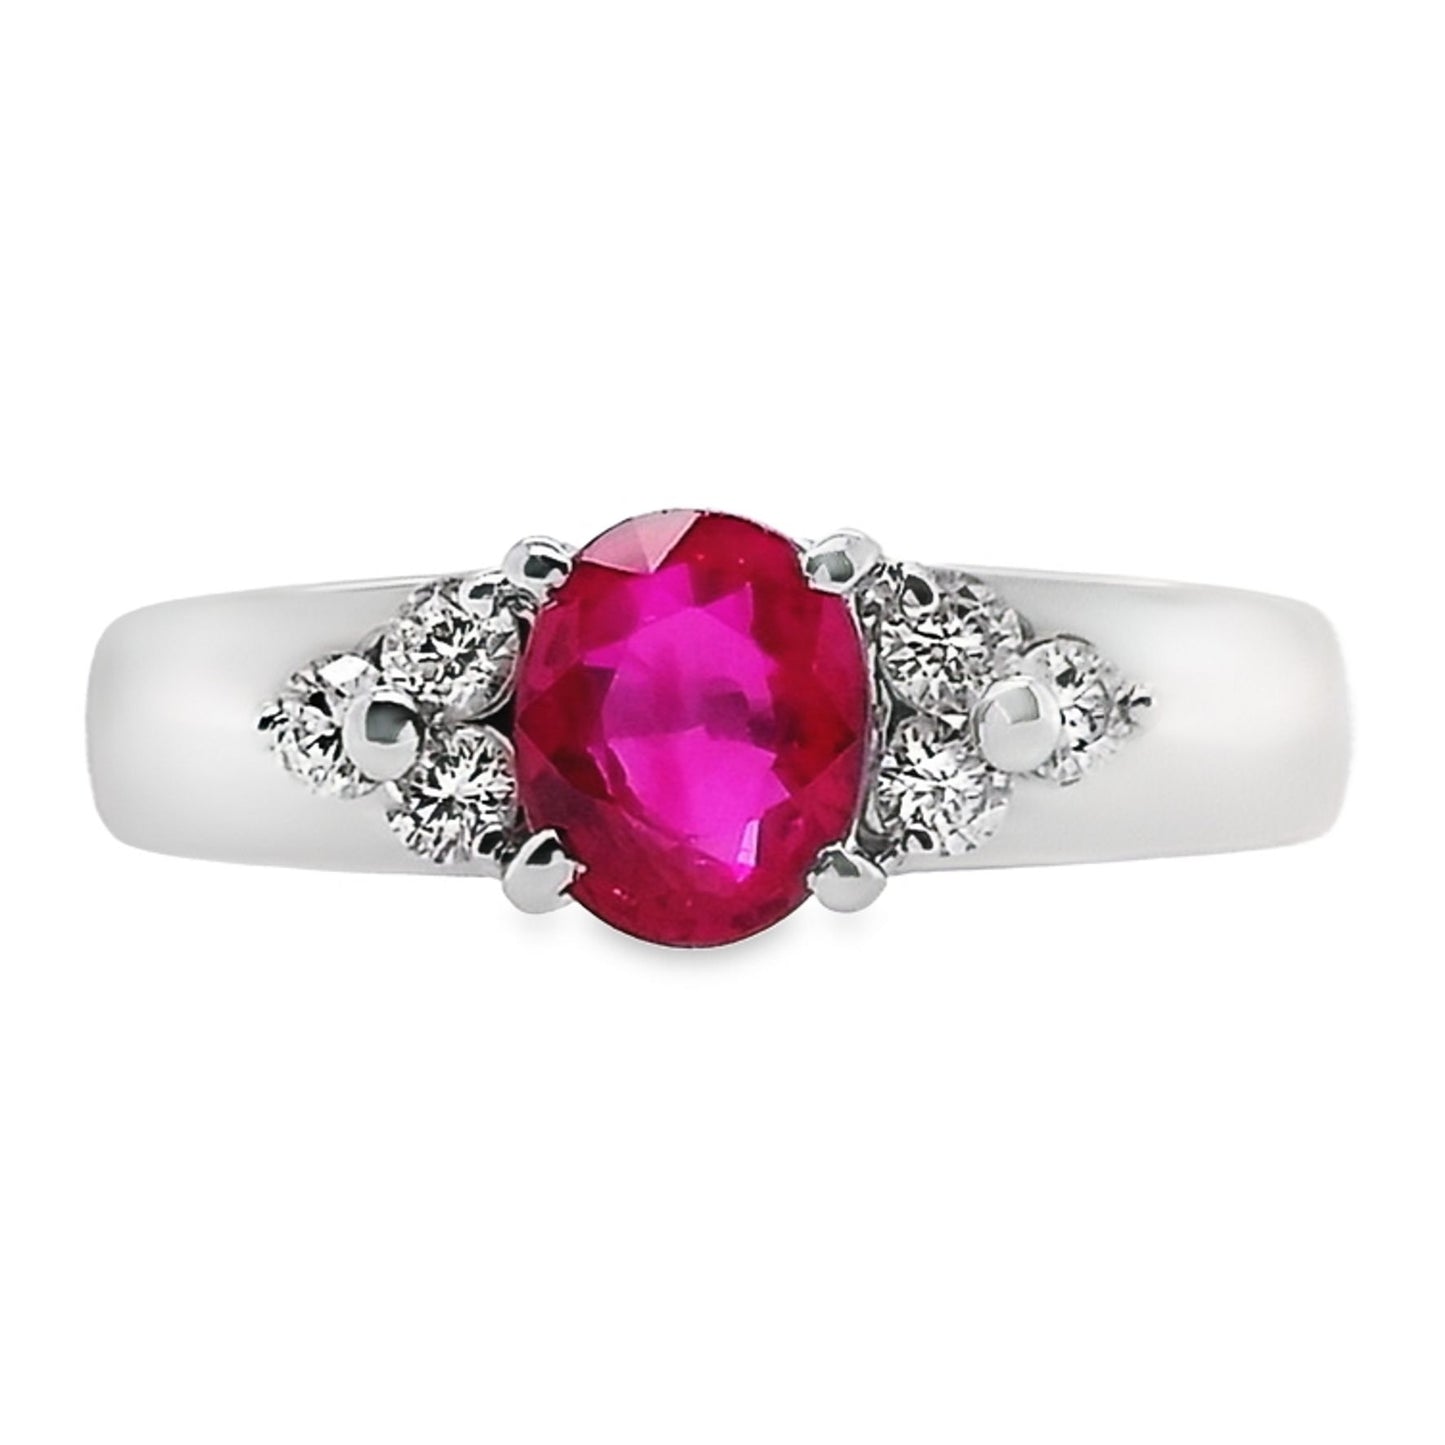 1.00ct NATURAL BURMA RUBY accented by 0.18ct NATURAL DIAMONDS set in Platinum Ring